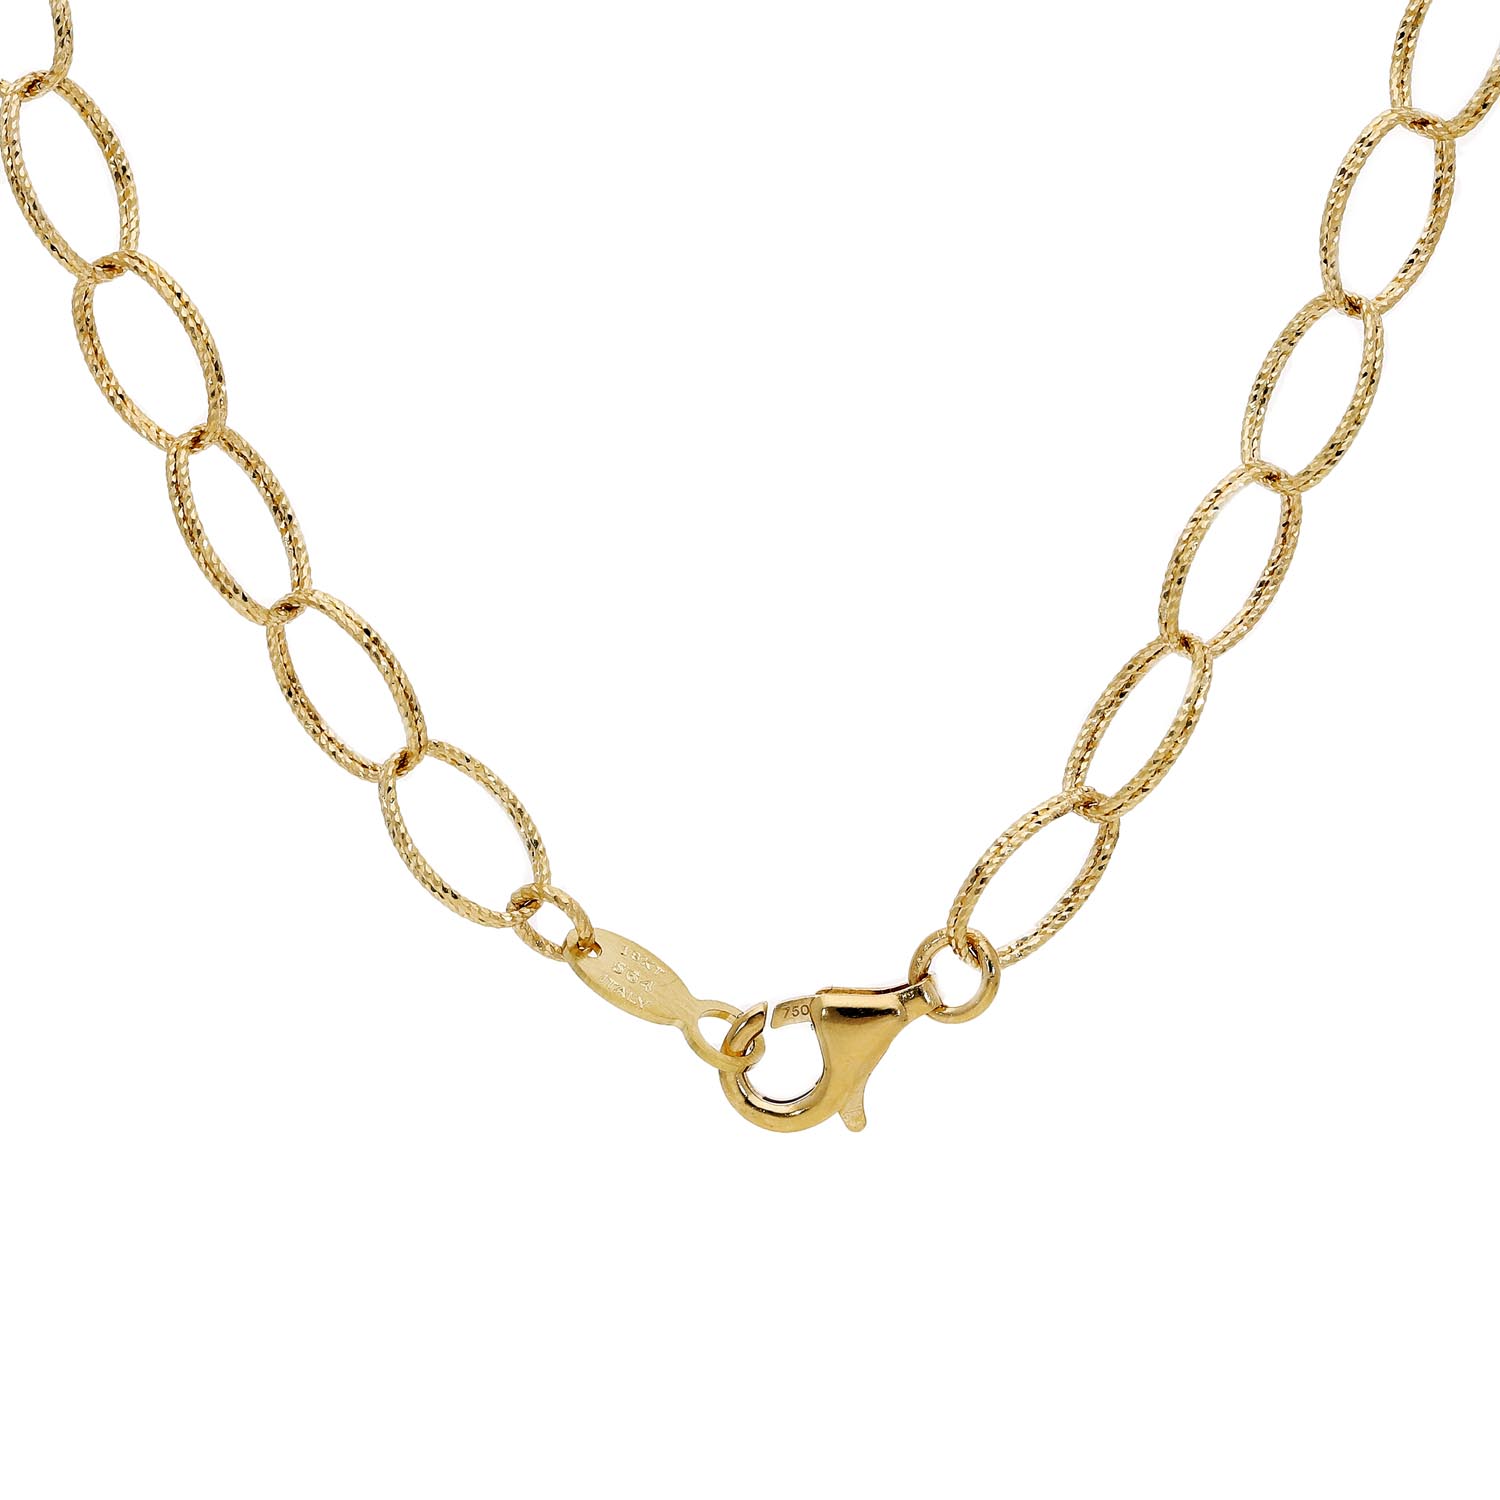 Gold NecklaceStyle #: PD-G138N